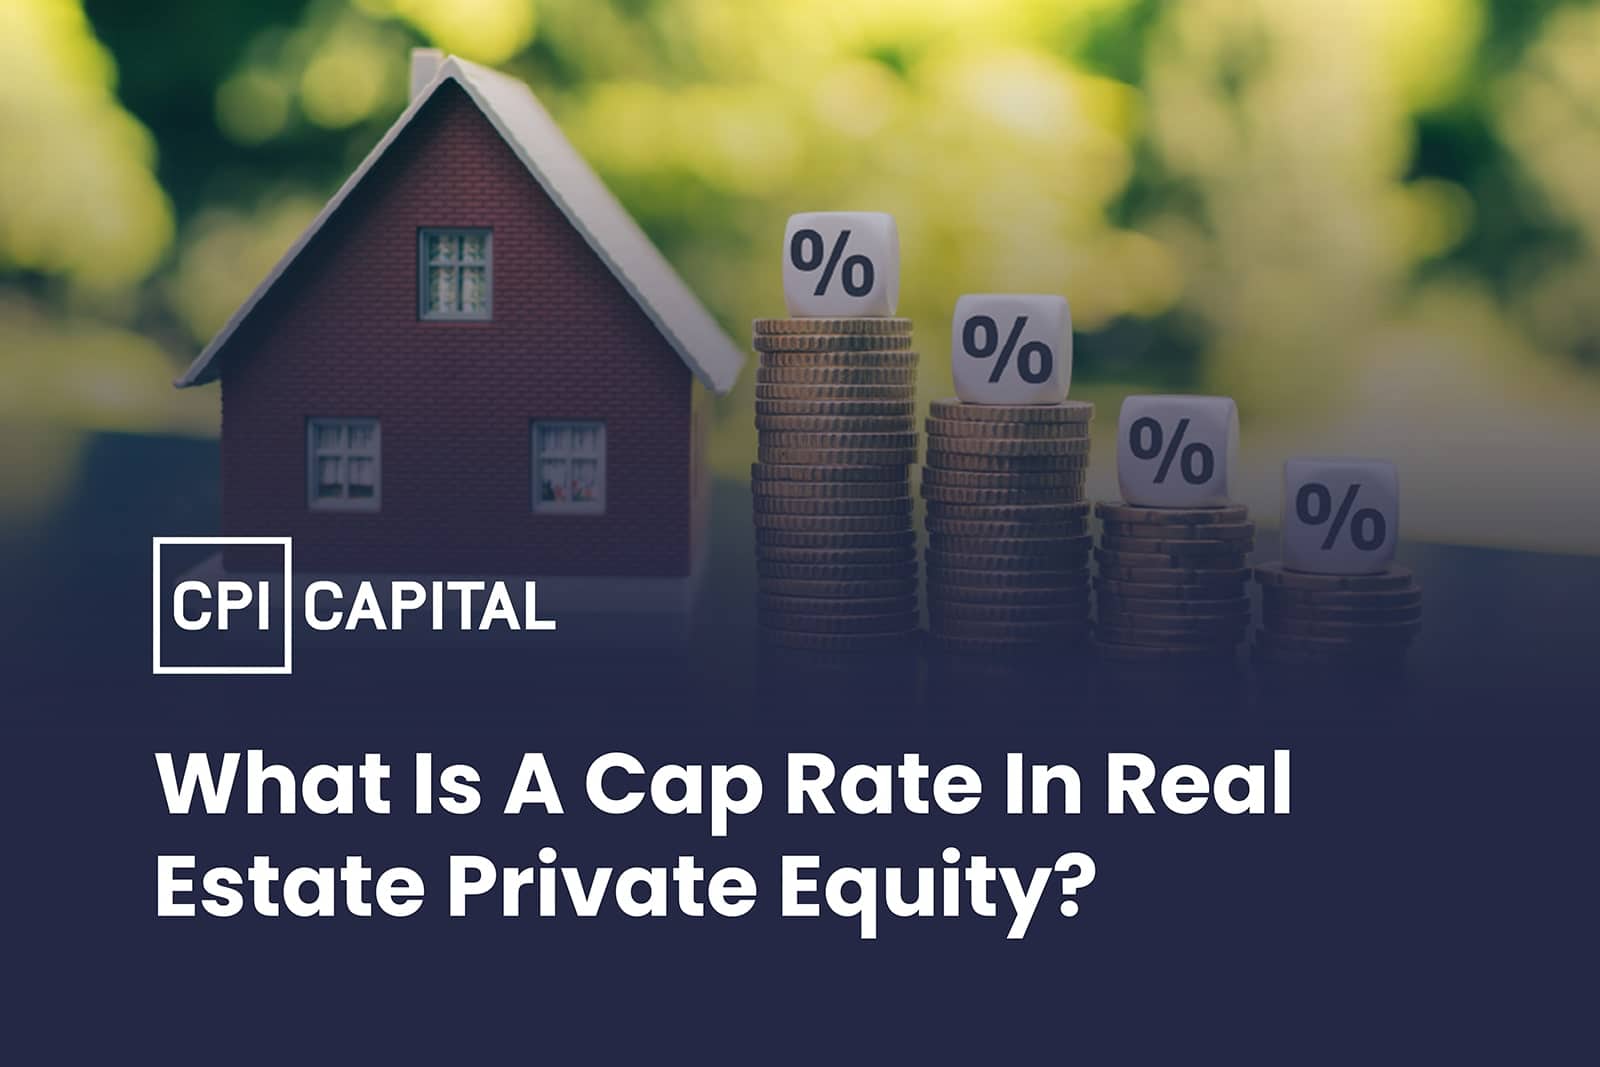 What is a Cap Rate?